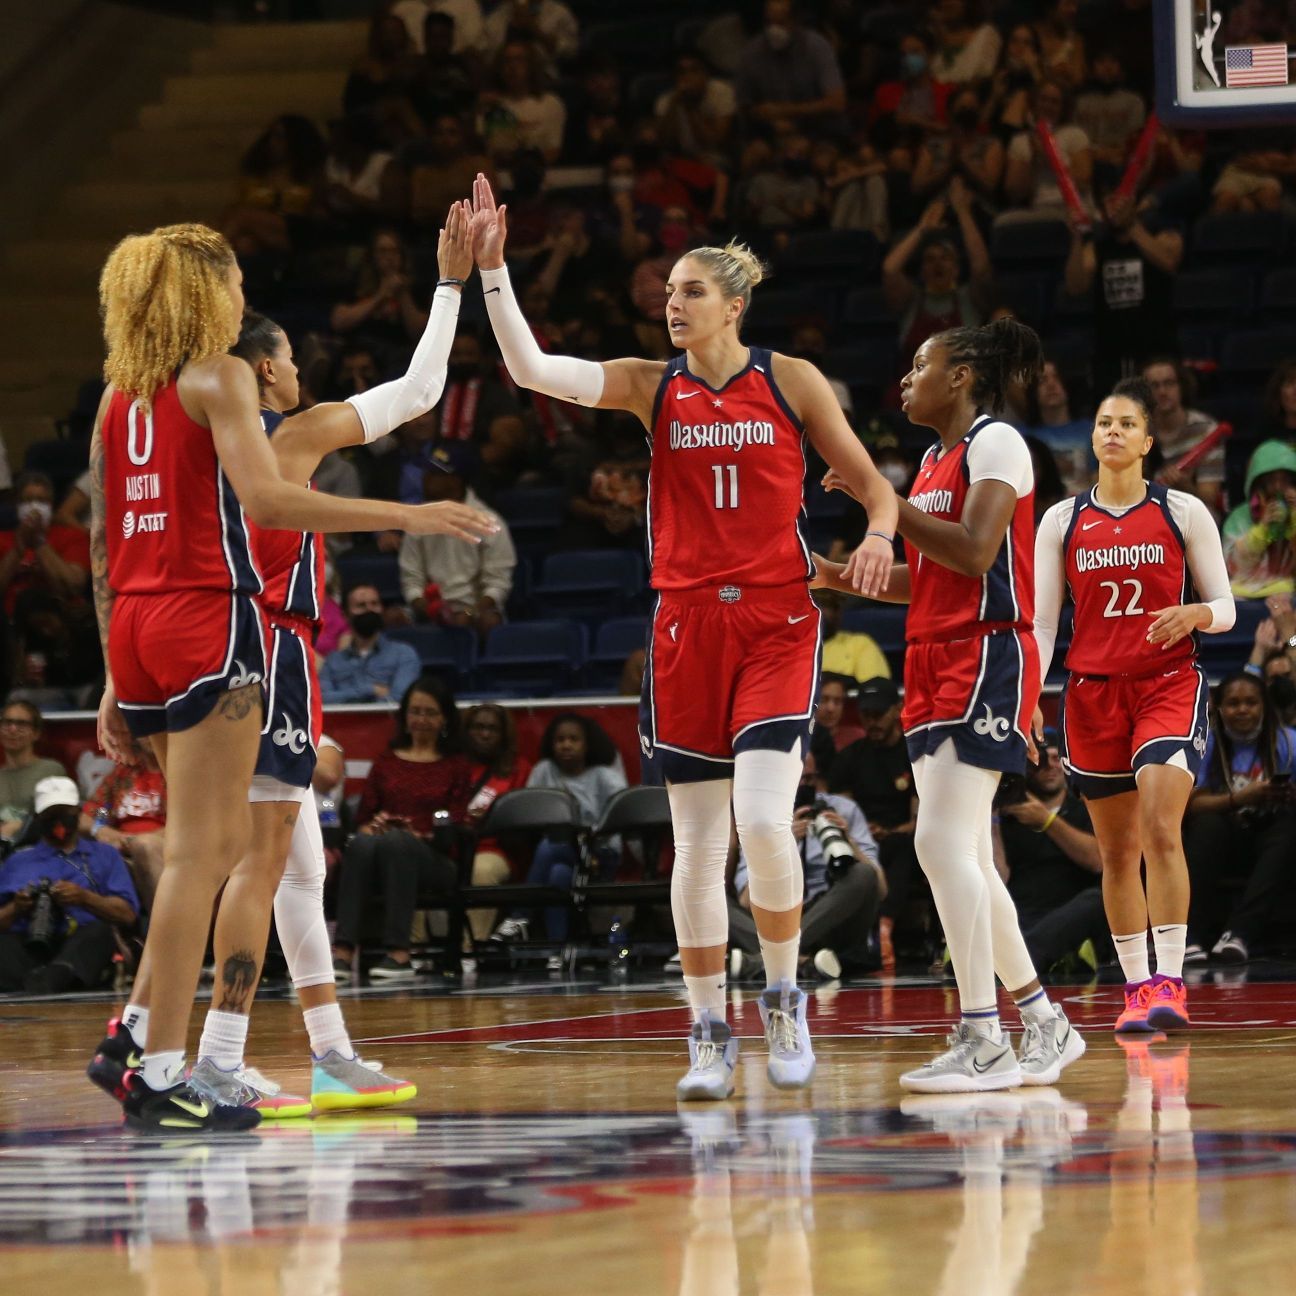 Rhyne Howard for WNBA Rookie of the Year? Shakira Austin's impact says not so fast